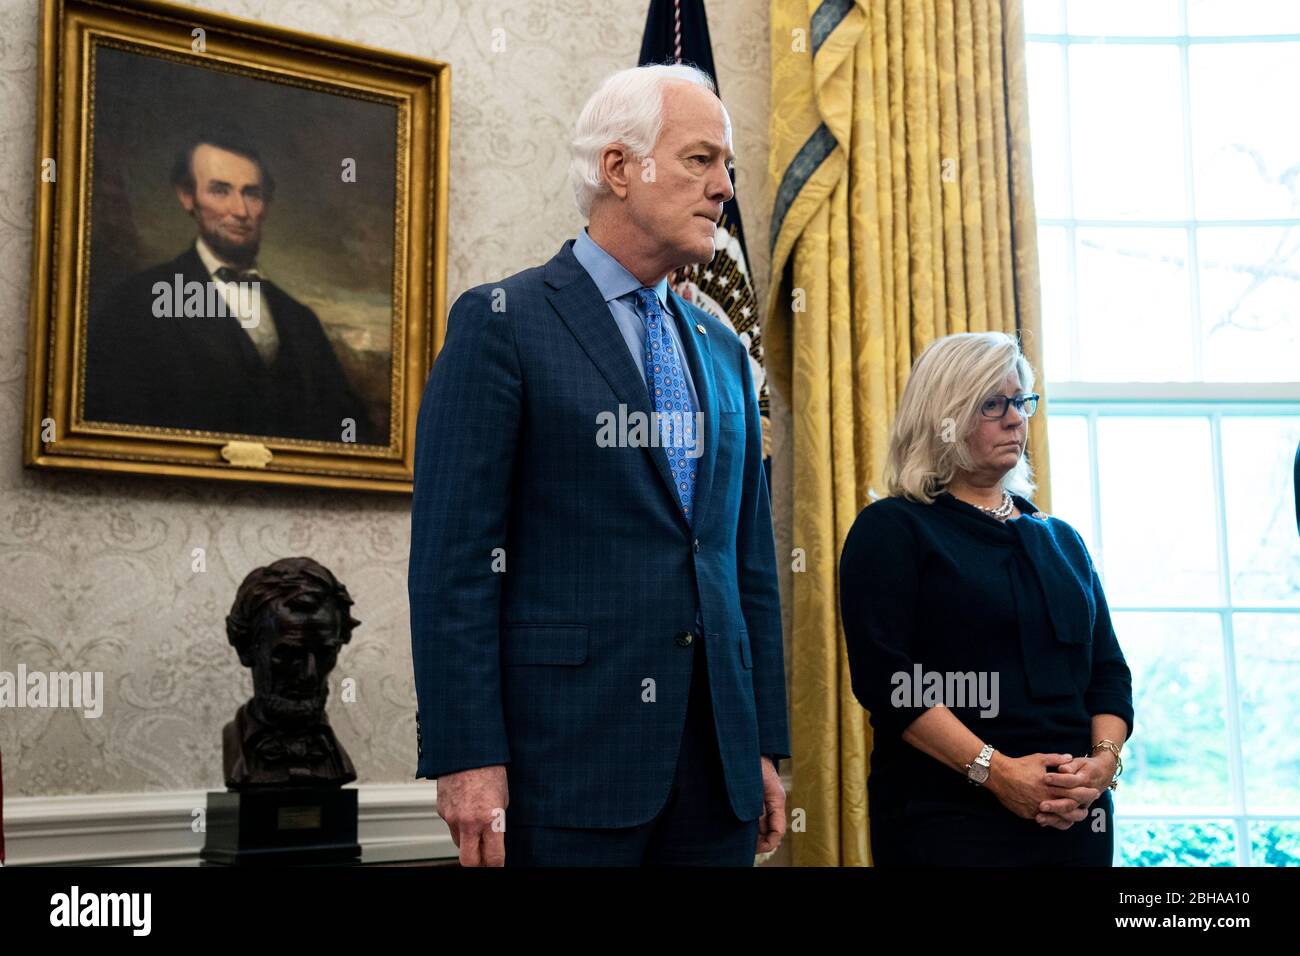 From left to right: United States Senator John Cornyn (Republican of Texas) and US Representative Liz Cheney (Republican of Wyoming) stand behind US President Donald J. Trump at a signing ceremony for H.R.266, the Paycheck Protection Program and Health Care Enhancement Act, in the Oval Office of the White House in Washington DC on April 24th, 2020.Credit: Anna Moneymaker/Pool via CNP/MediaPunch Stock Photo